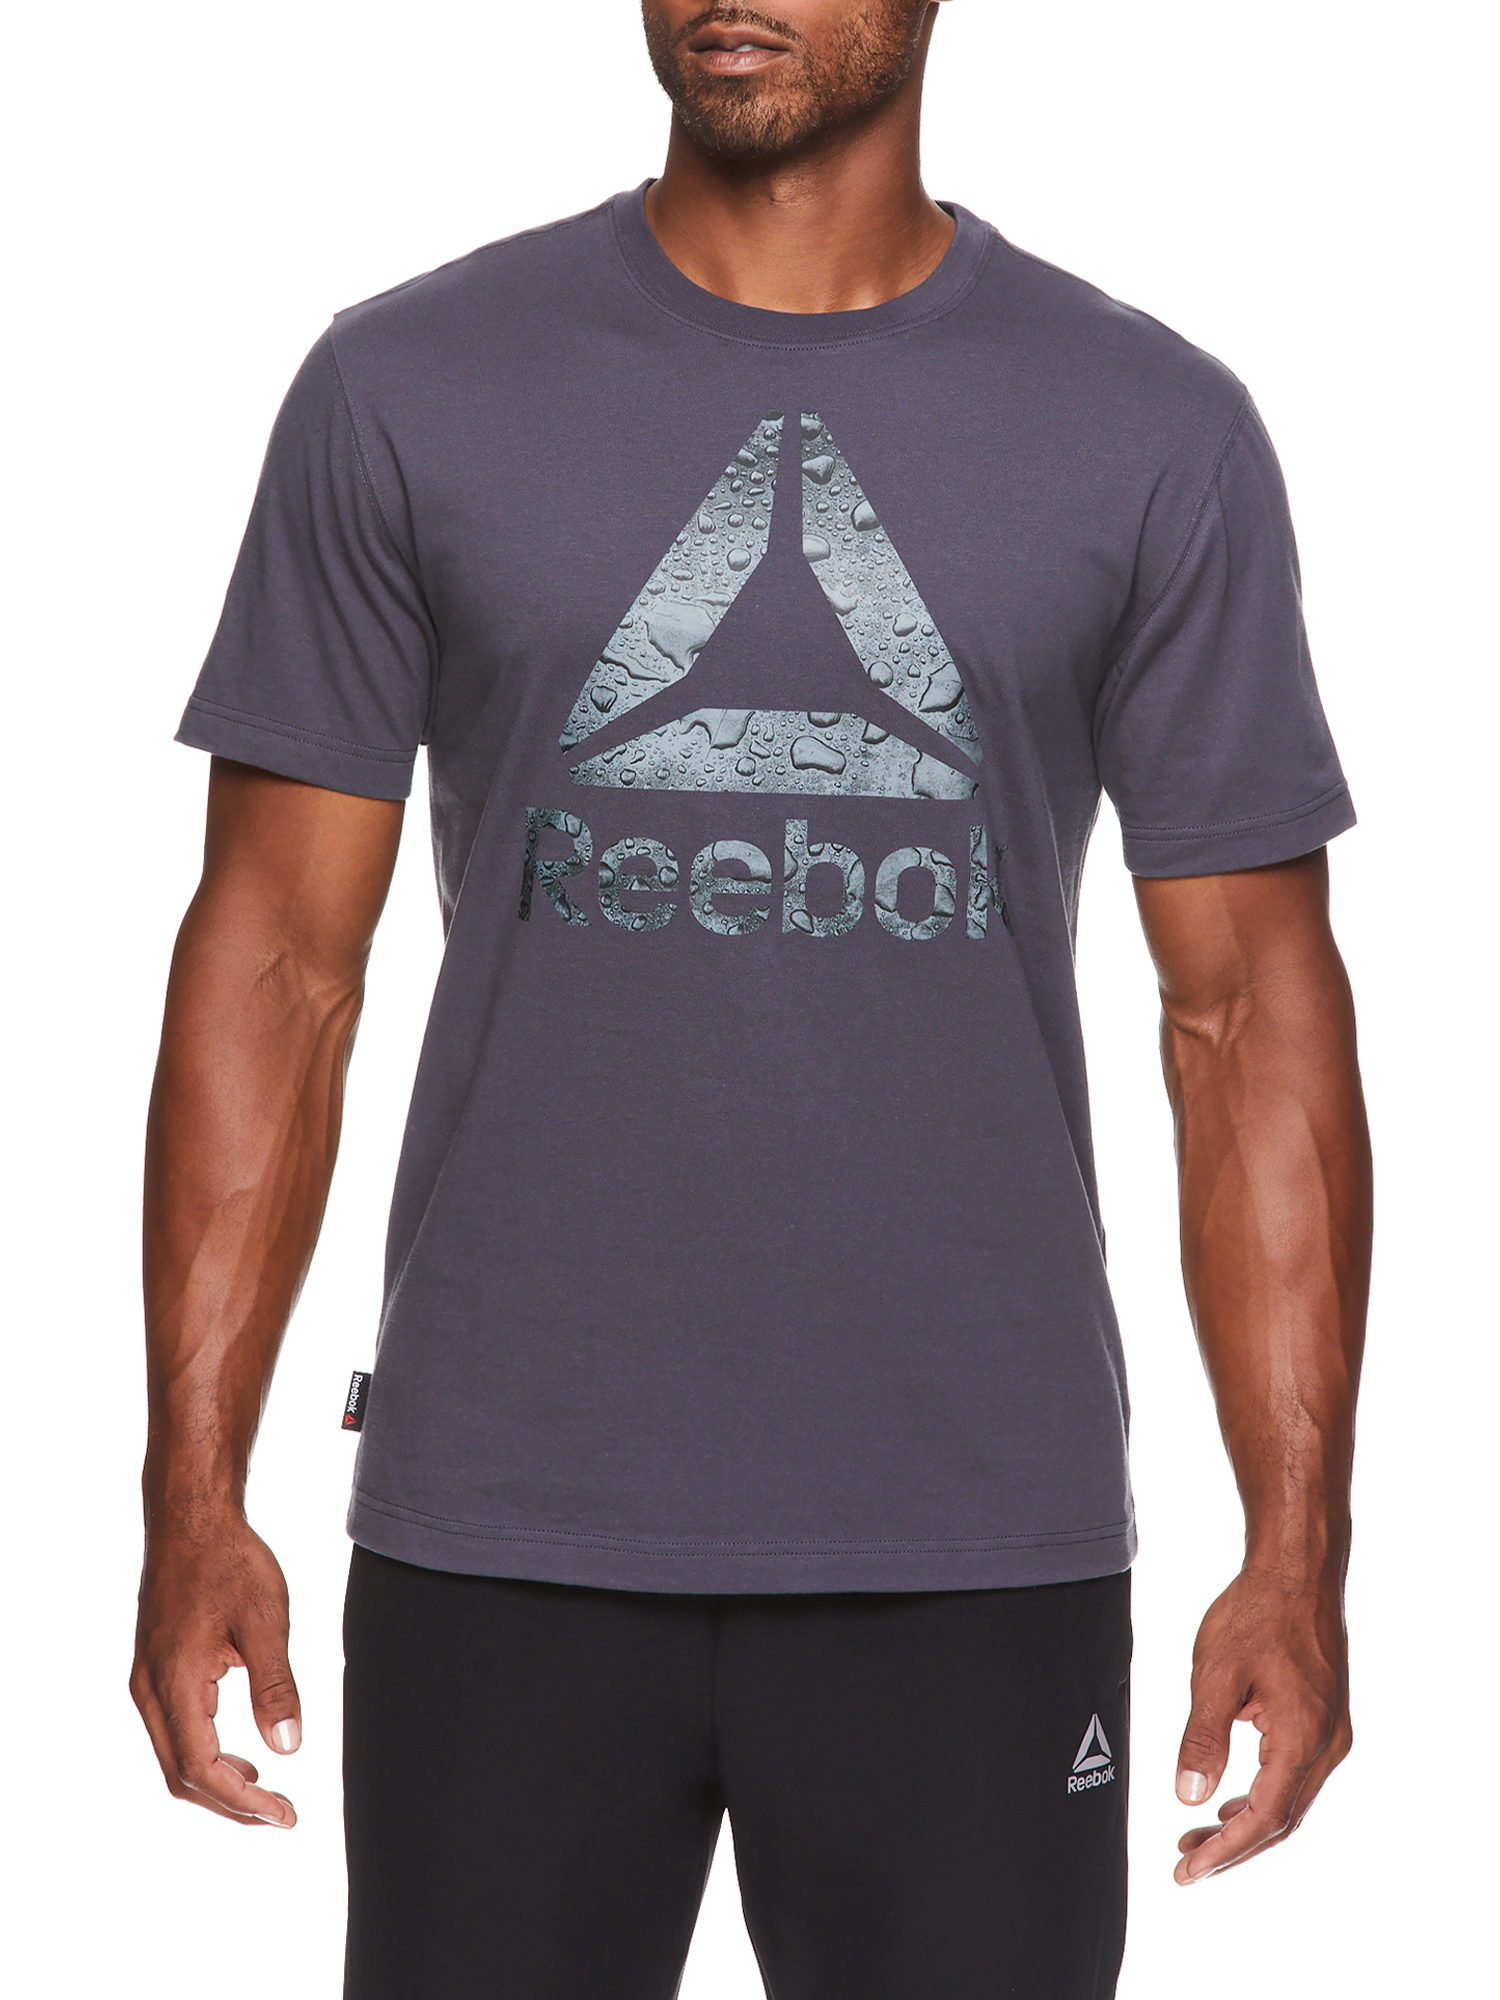 Reebok Men's and Big Men's Active Hiit Graphic Training Tee, up to Size 3XL - image 1 of 4